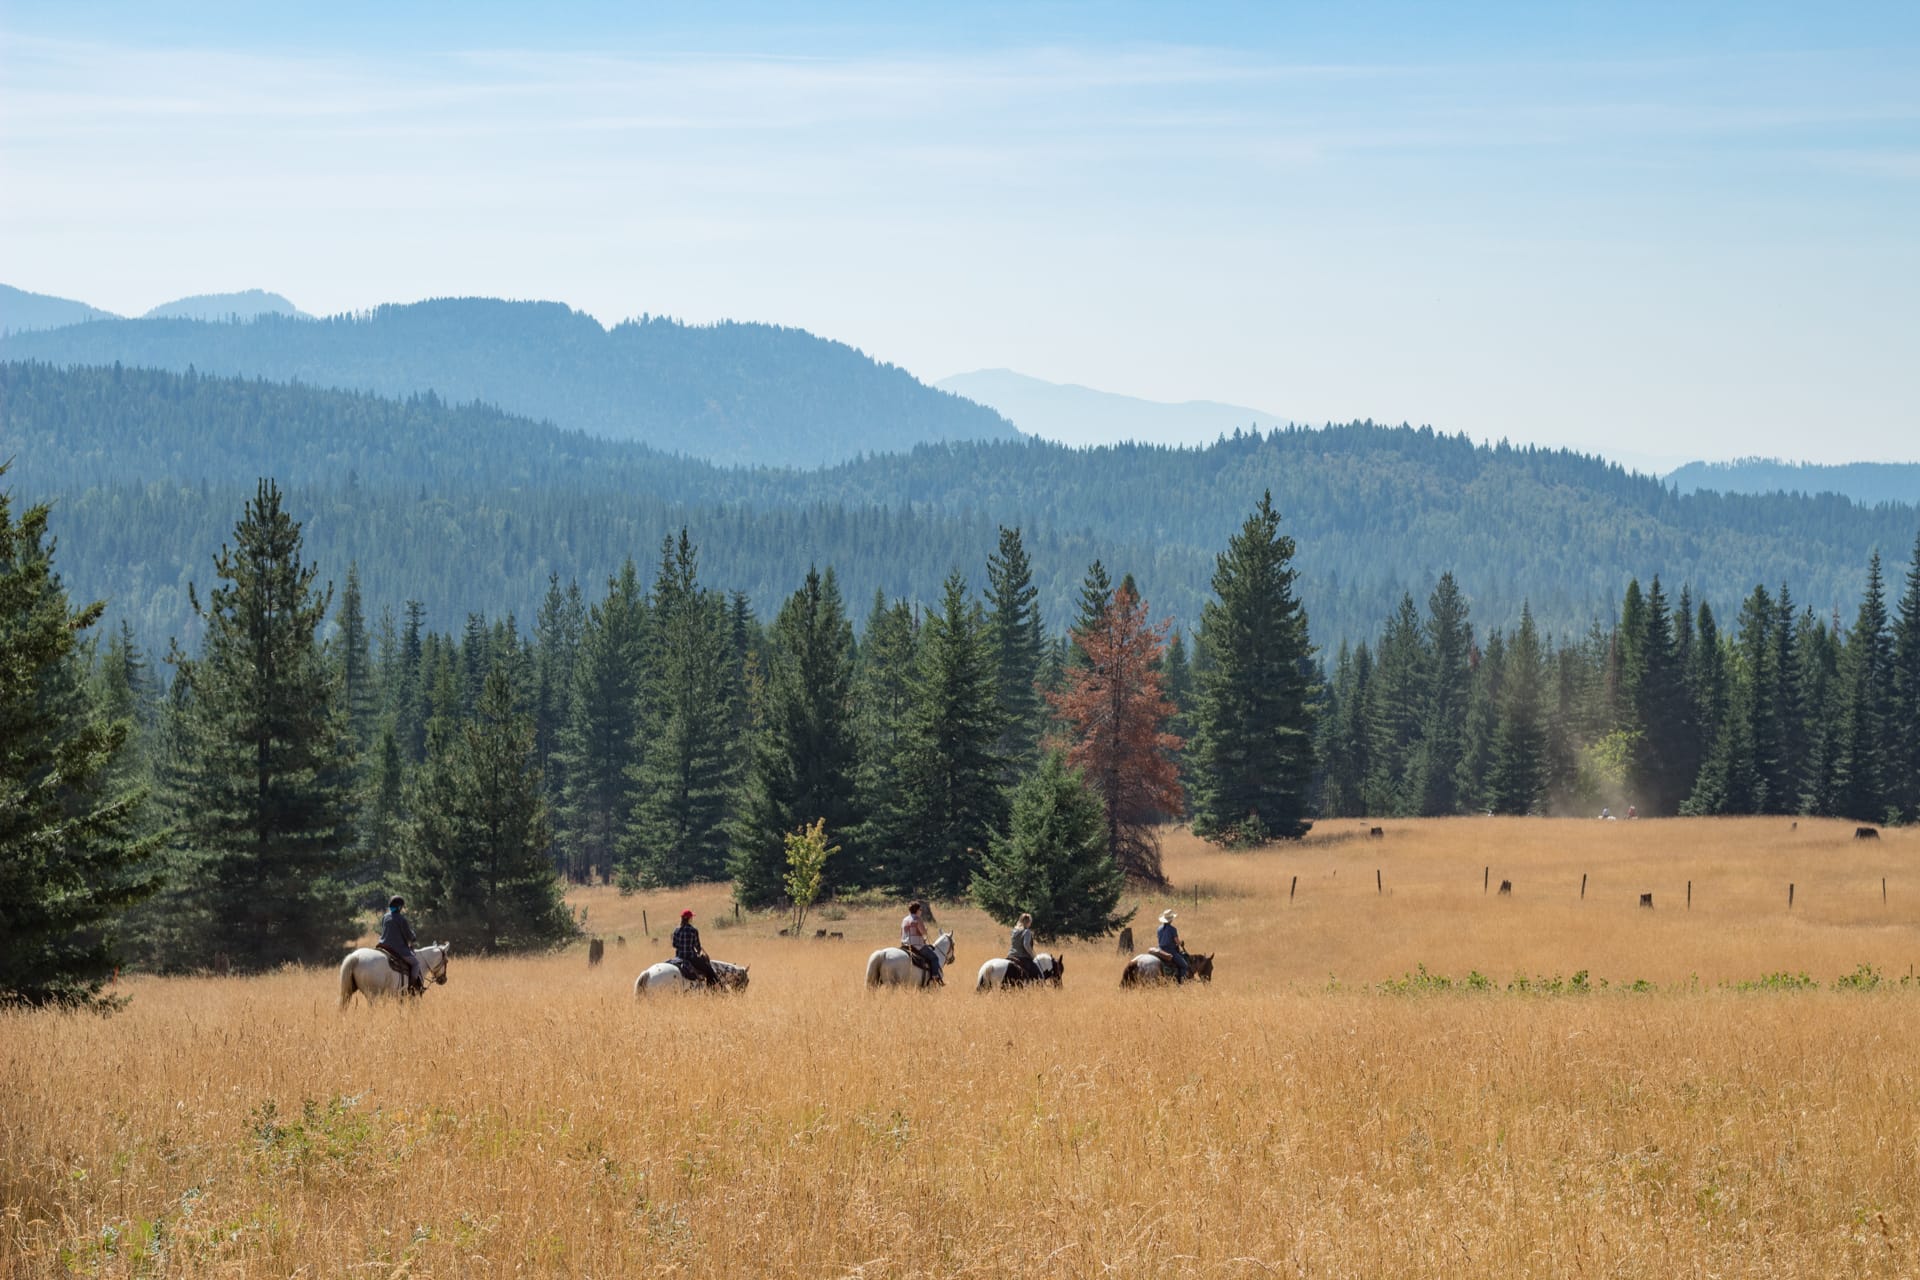 horseback riding at Western Pleasure Guest Ranch across an open ridge with mountains in the background